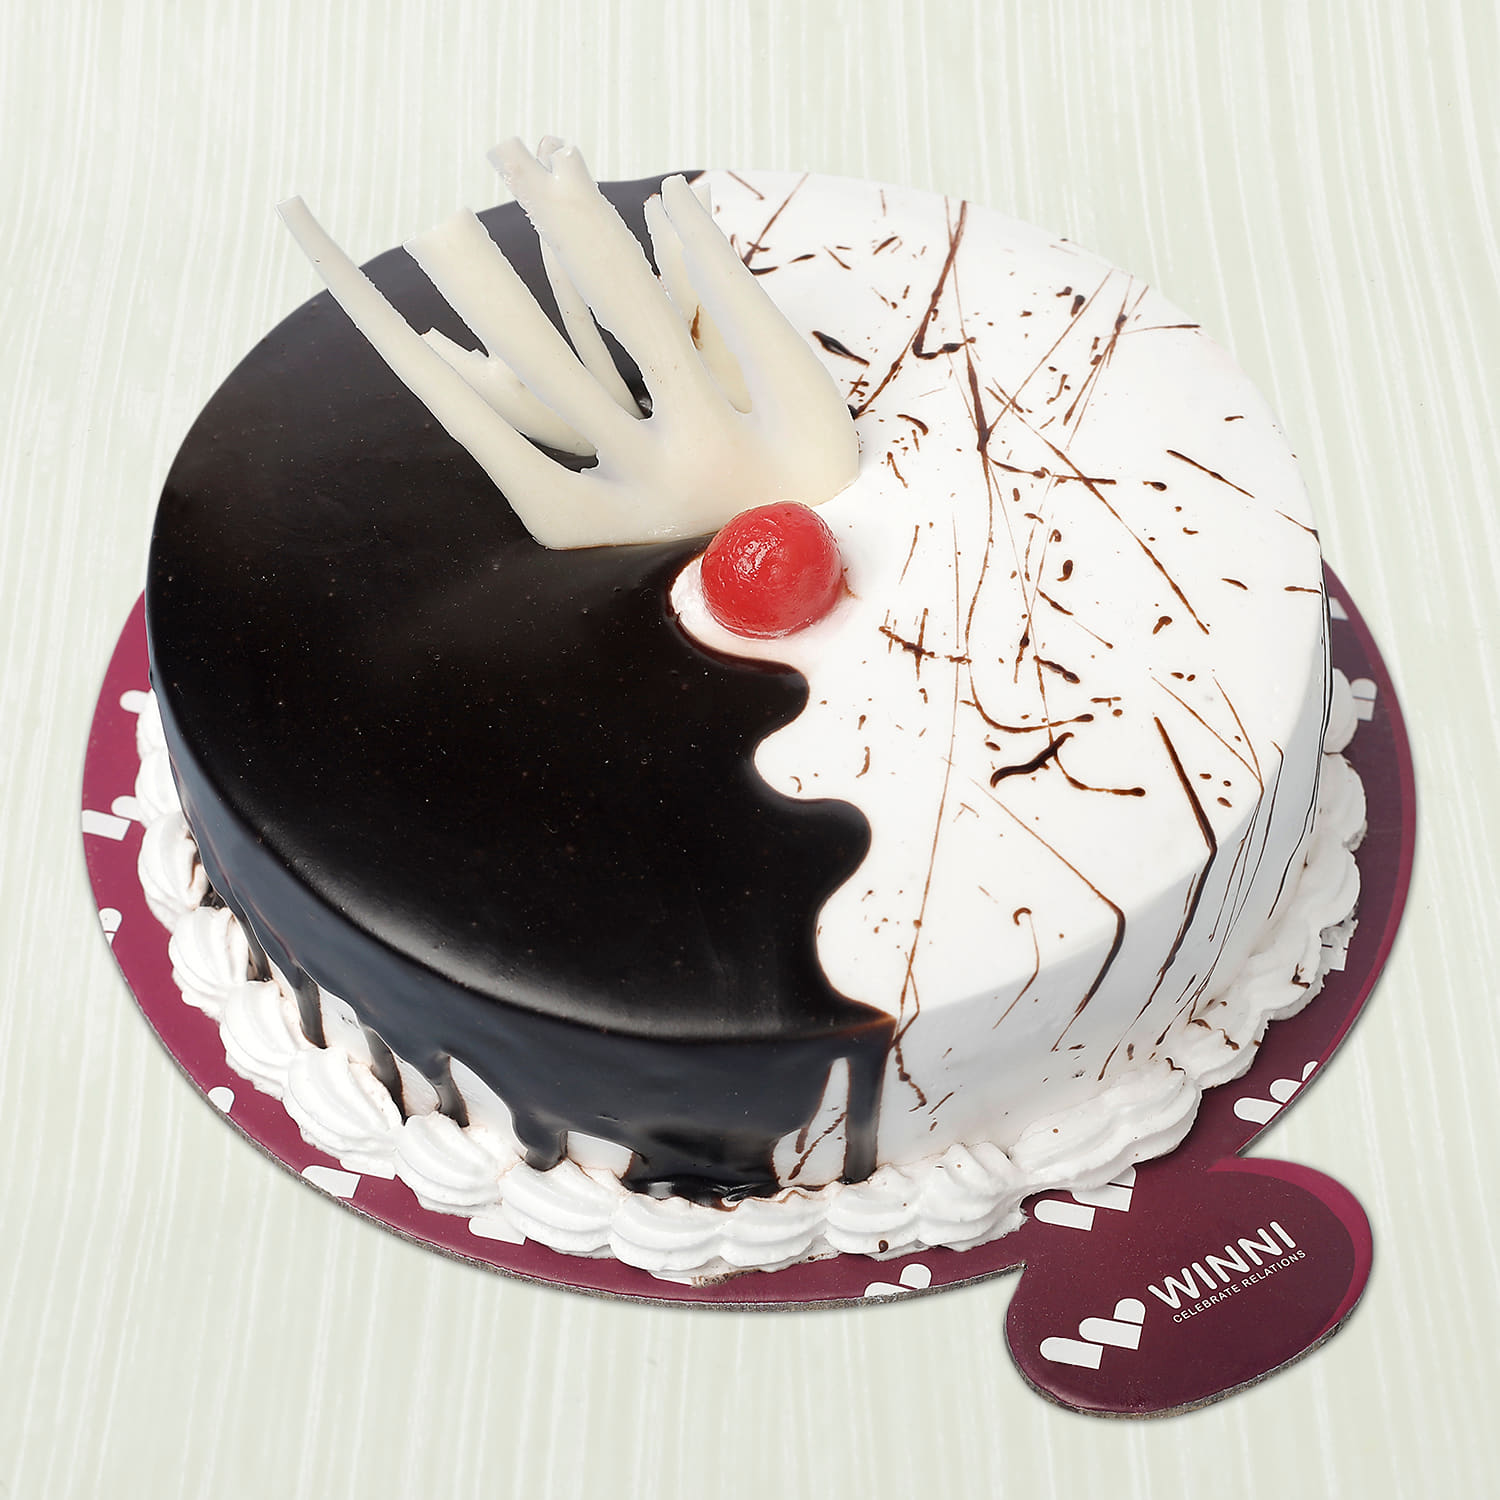 Pista Berry Fusion Cake Online Delivery UAE - Floral Allure